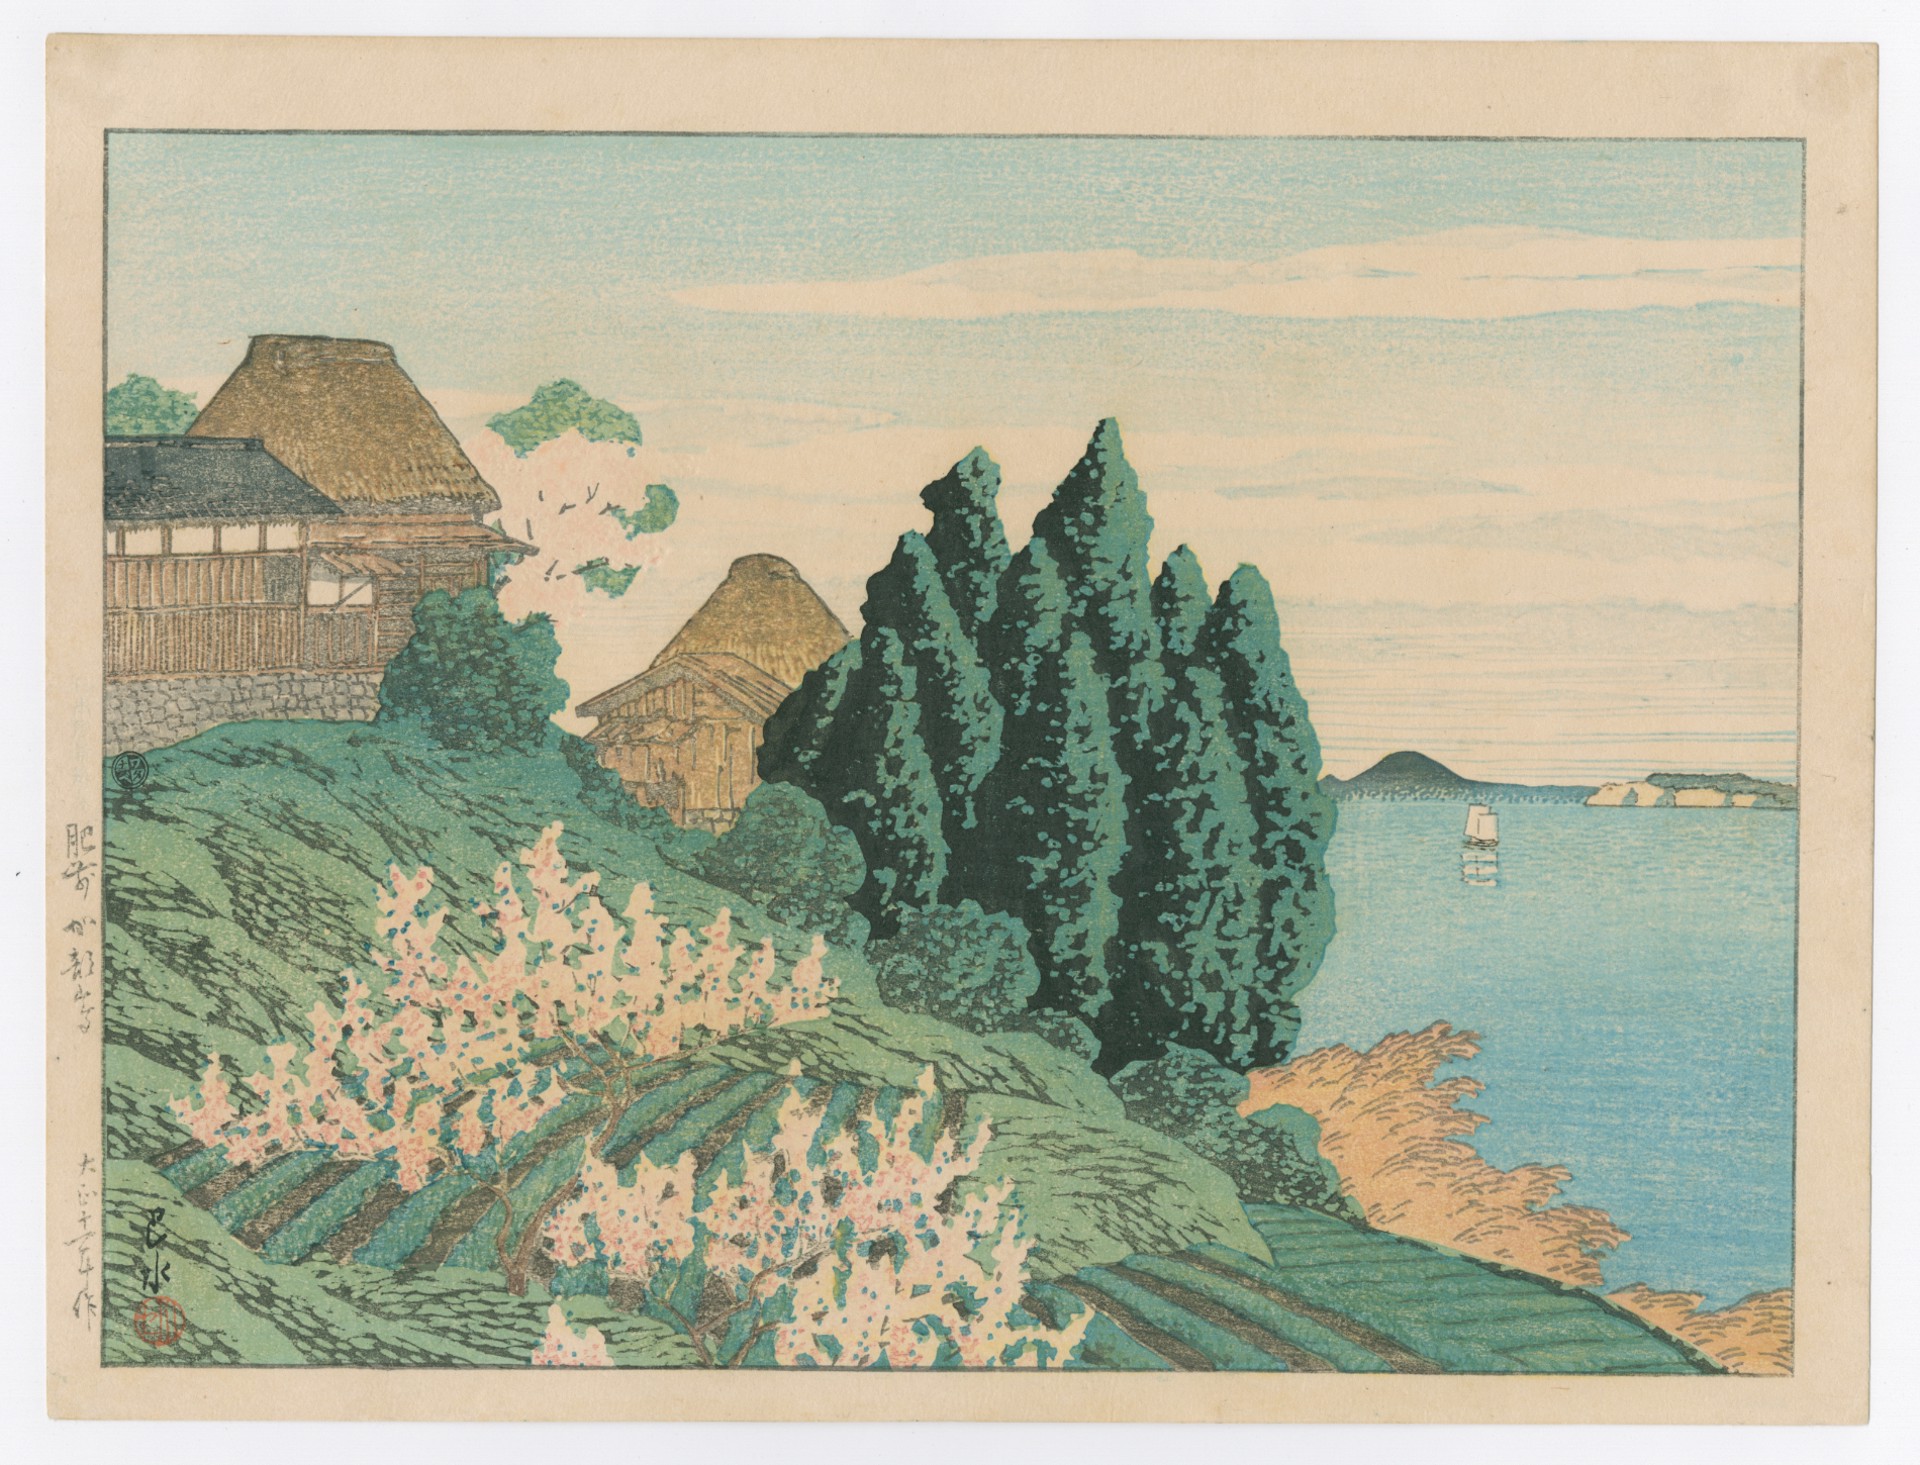 #100 Kabeshima, Hizen Selection of Scenes of Japan by Hasui